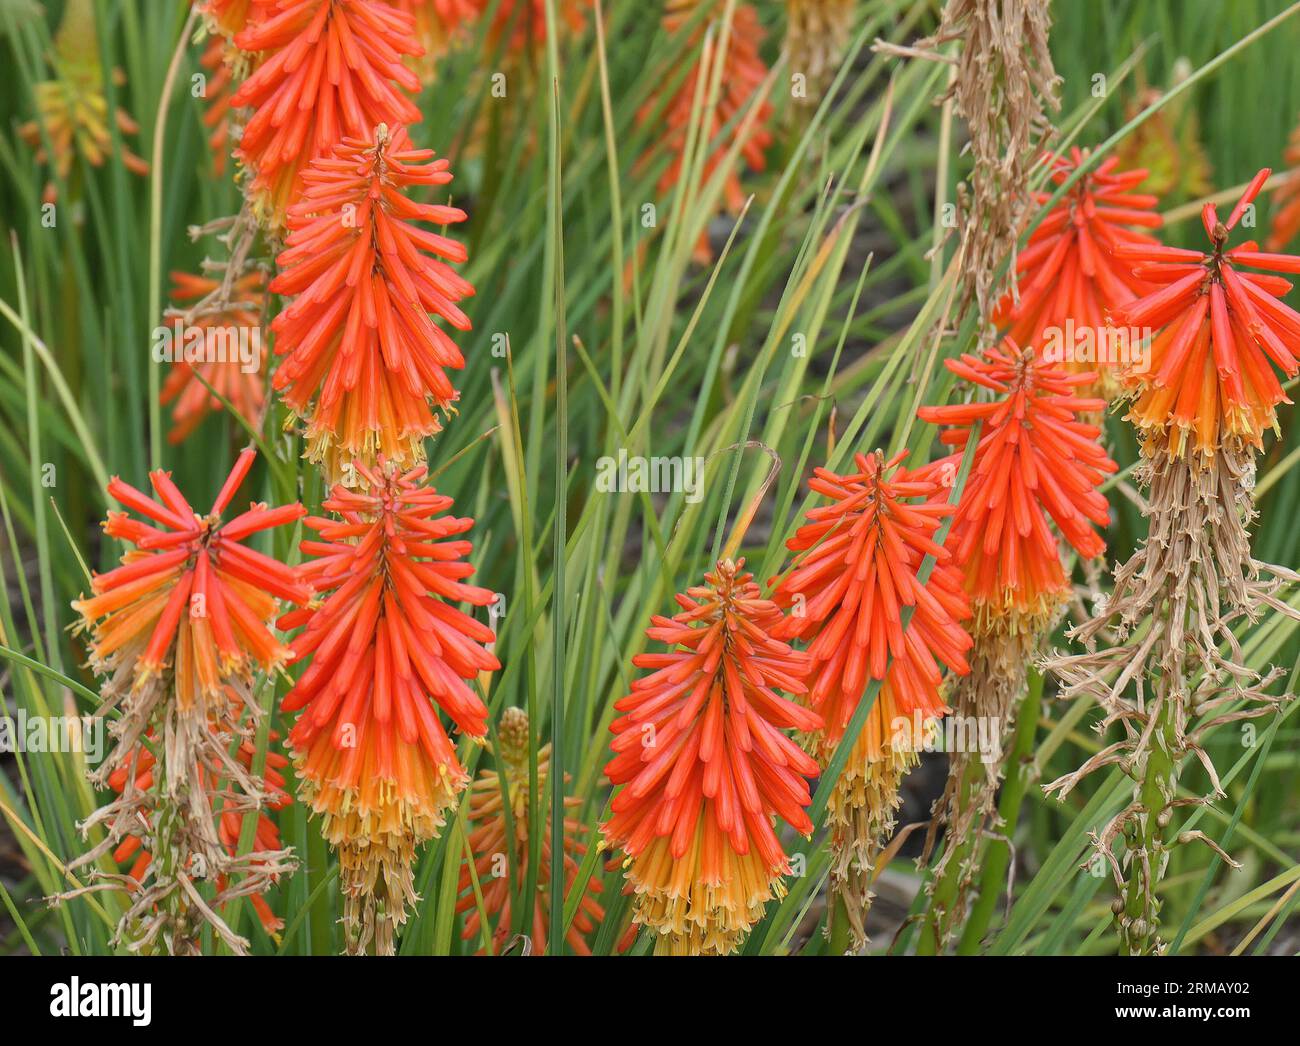 Closeup of the summer and autumn flowering herbaceous perennial garden plant kniphofia papaya popsicle or hot poker. Stock Photo